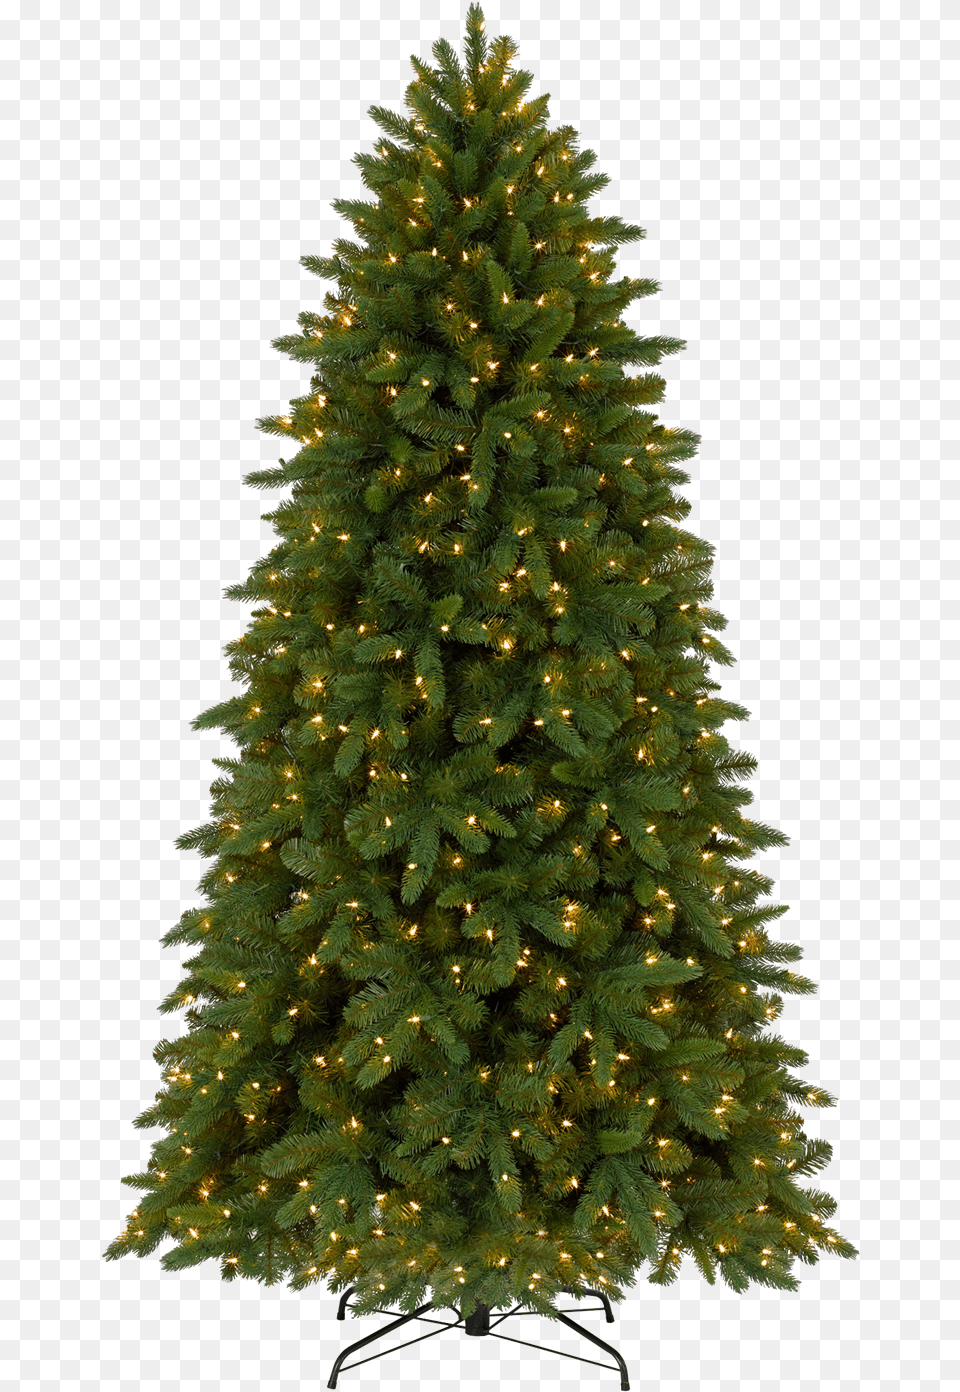 Fir Tree Hd Background Christmas Tree, Plant, Christmas Decorations, Festival, Pine Png Image